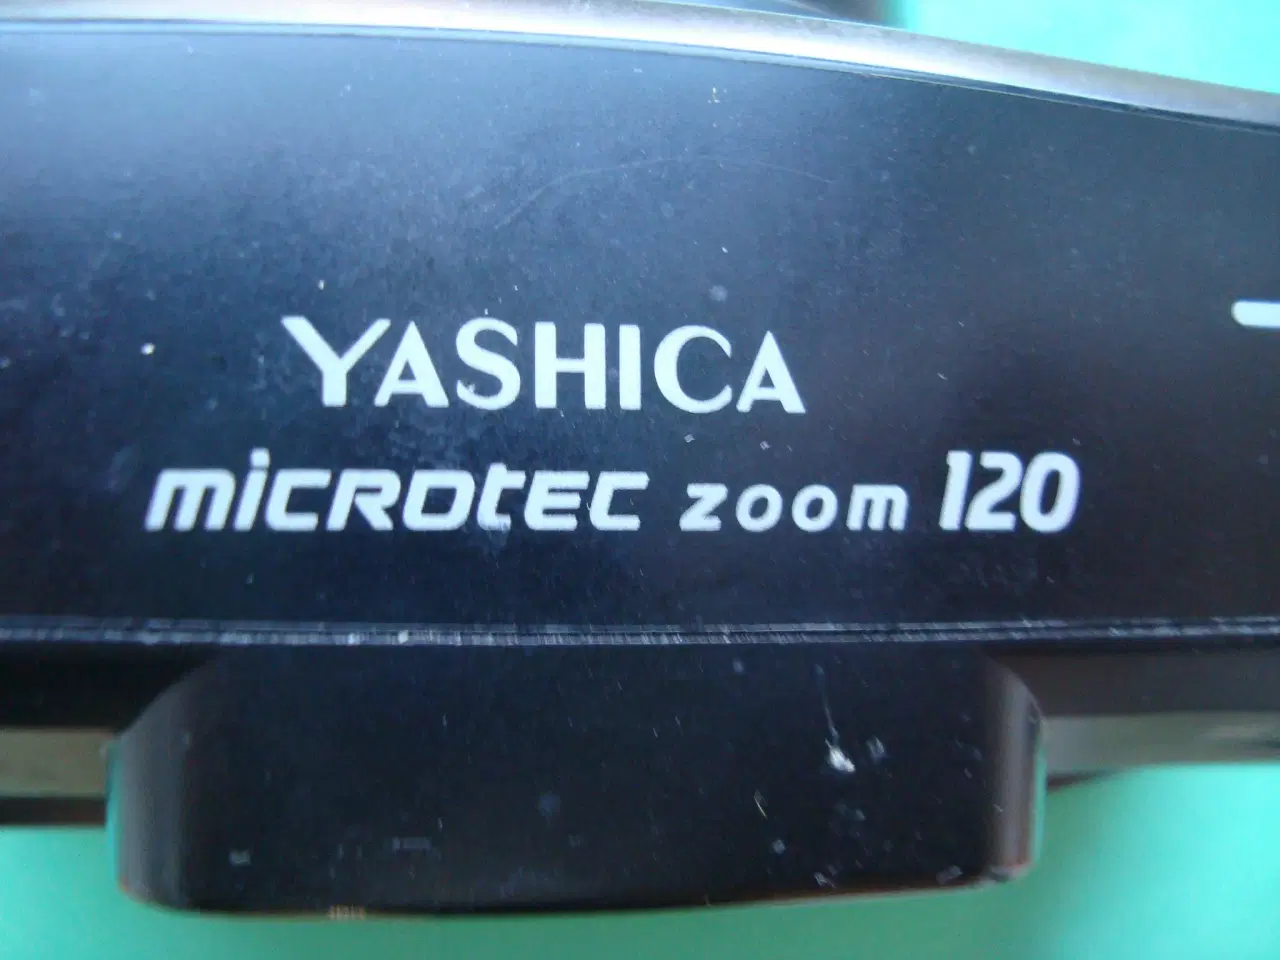 Billede 5 - Yashica microtex zoom 120